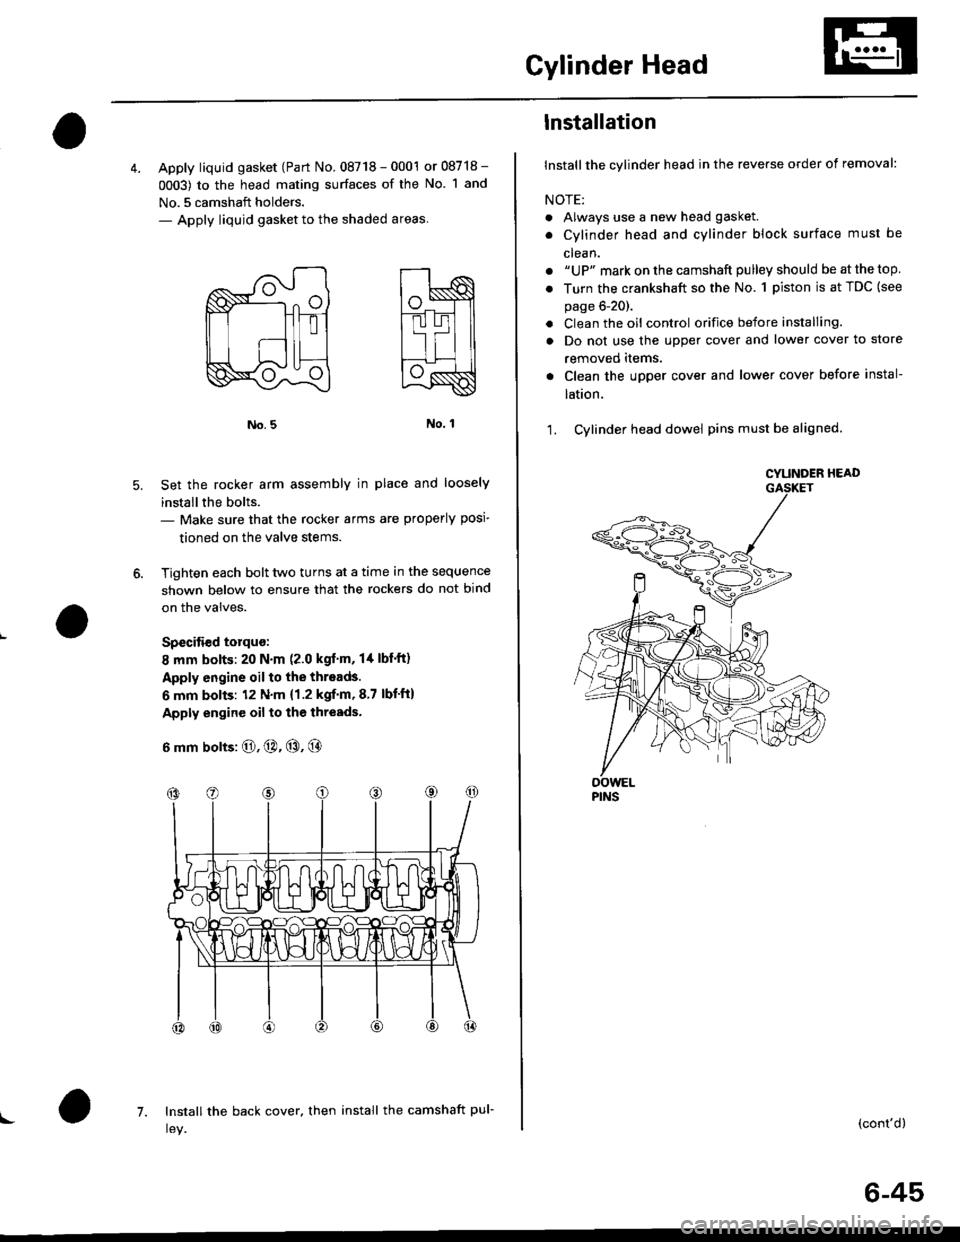 HONDA CIVIC 1996 6.G Workshop Manual Cylinder Head
4. Apply liquid gasket (Part No. 08718 - 0001 or 08718 -
0003) to the head mating surfaces of the No. 1 and
No.5 camshaft holders.- Apply liquid gasket to the shaded areas
Set the rocker